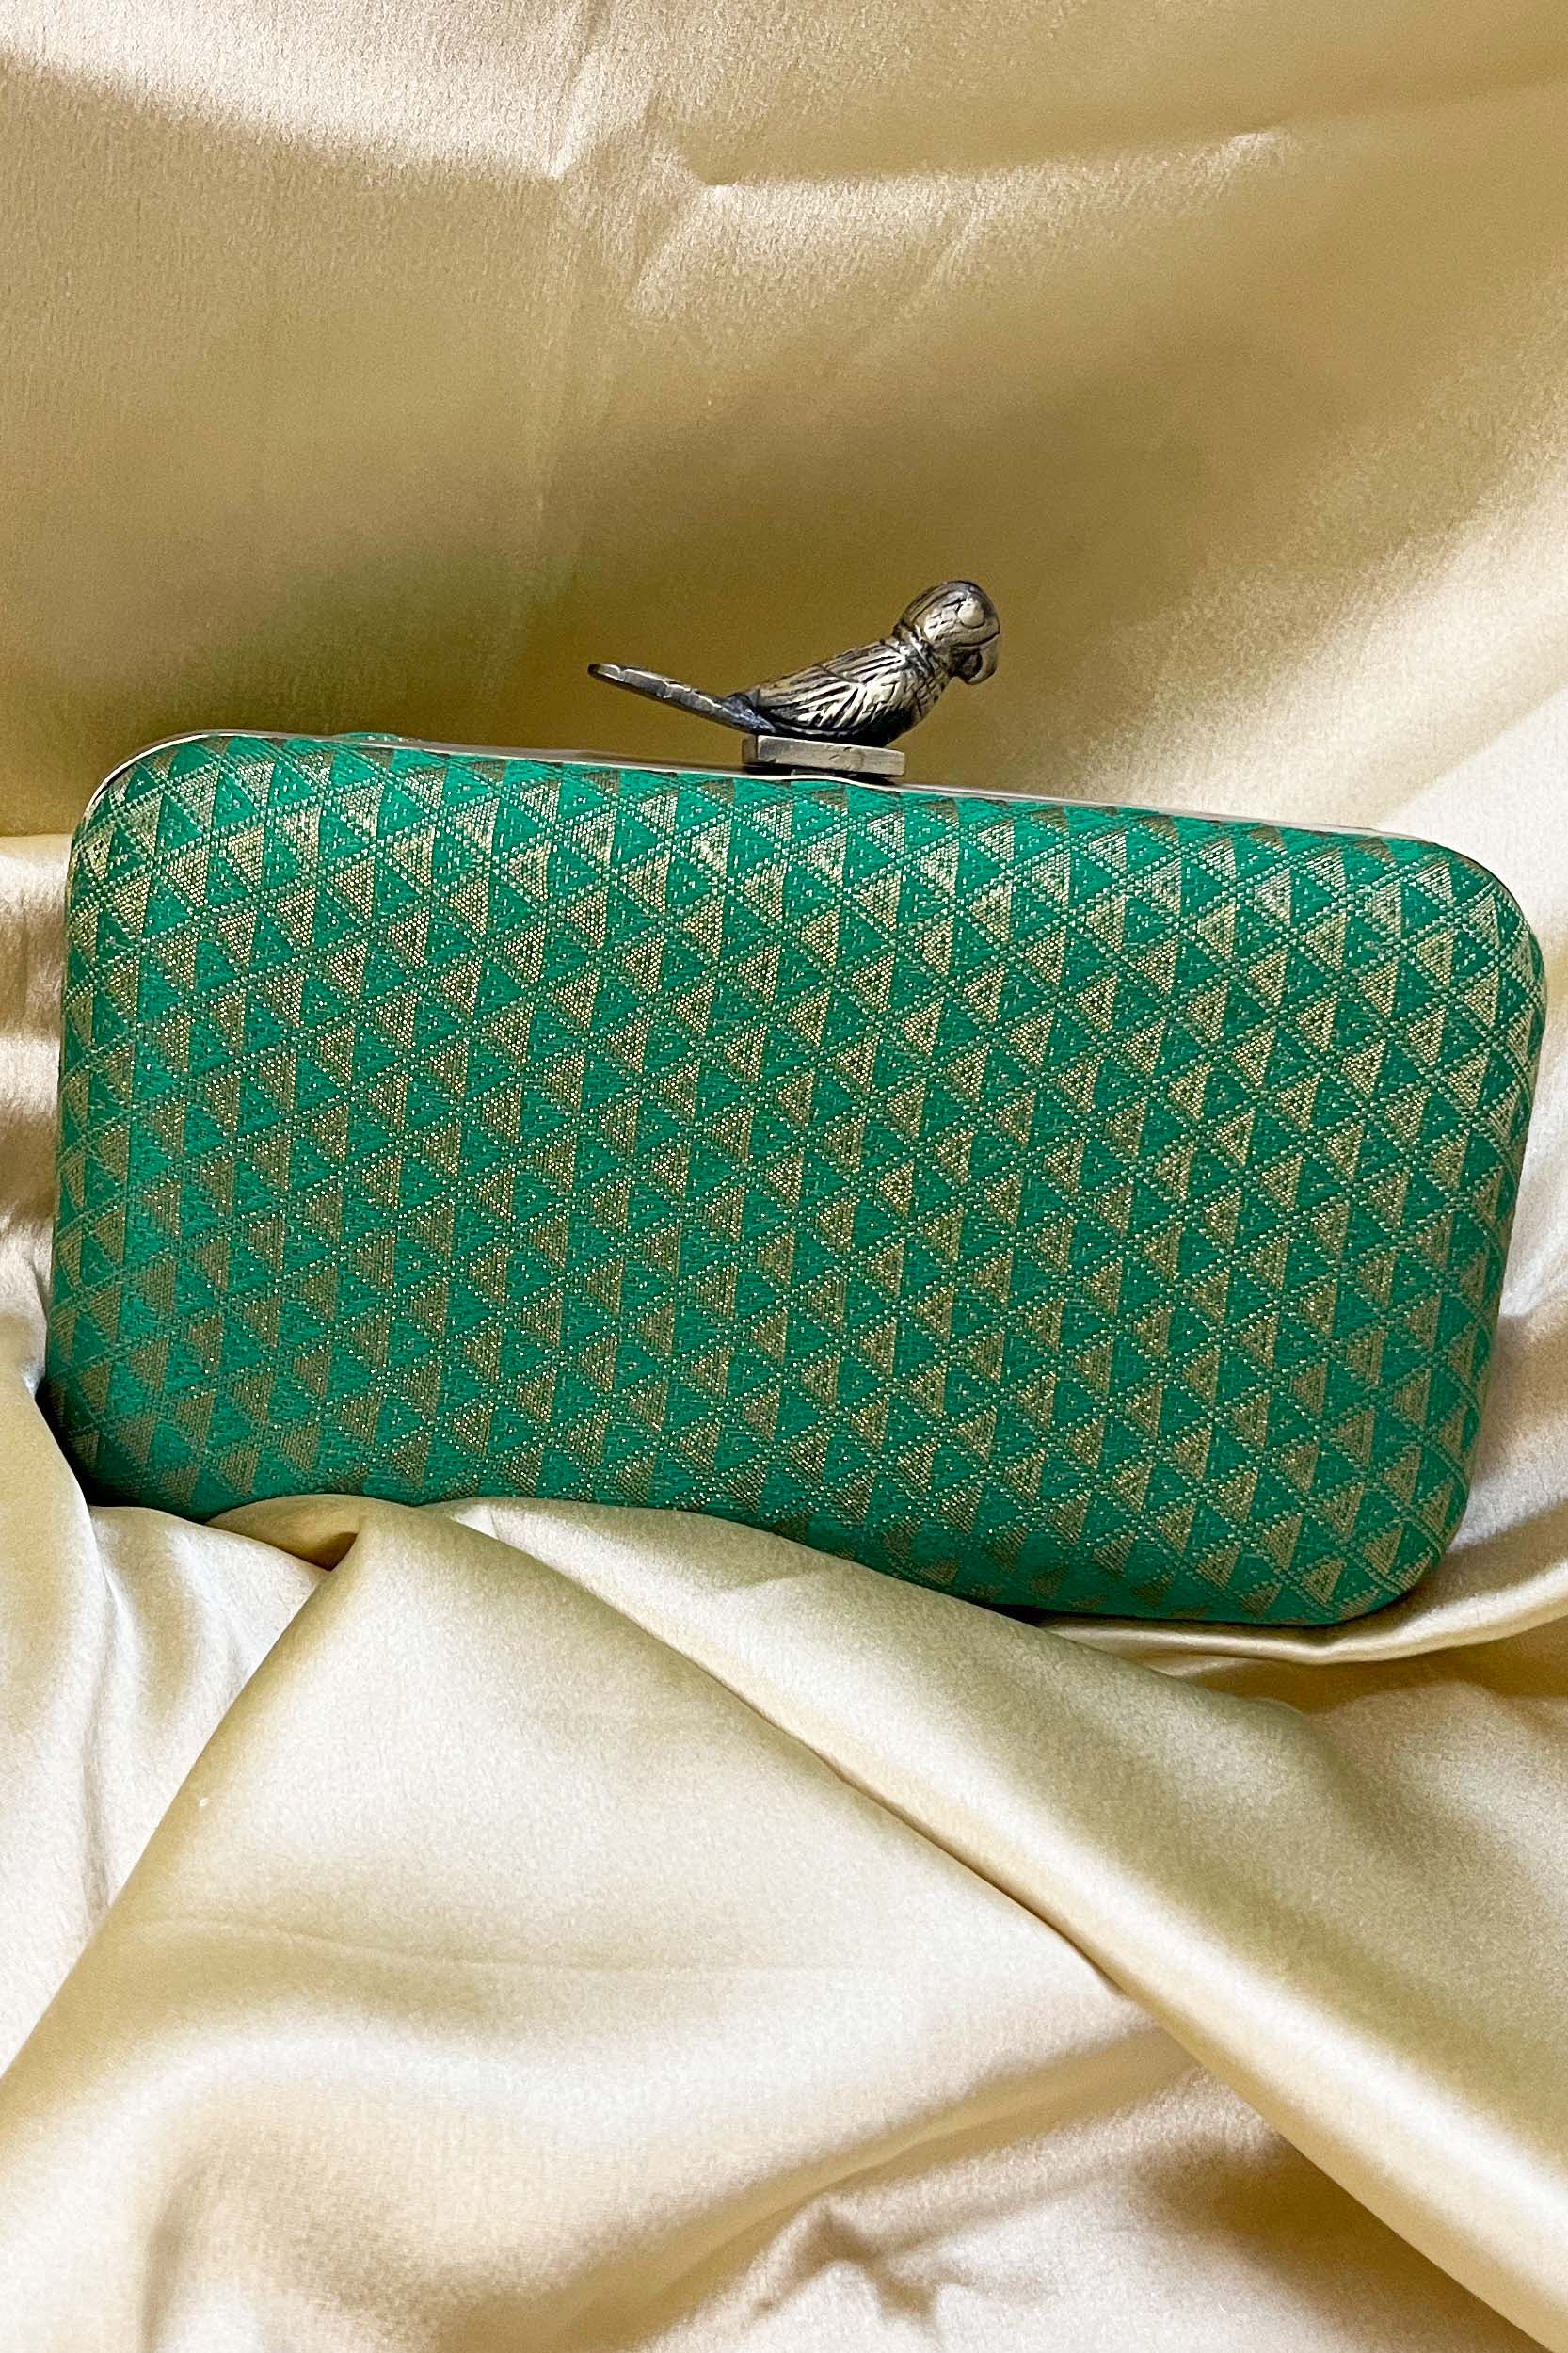 Shop The Ethereal Emerald Green Brocade Clutch with Golden Triangle Details